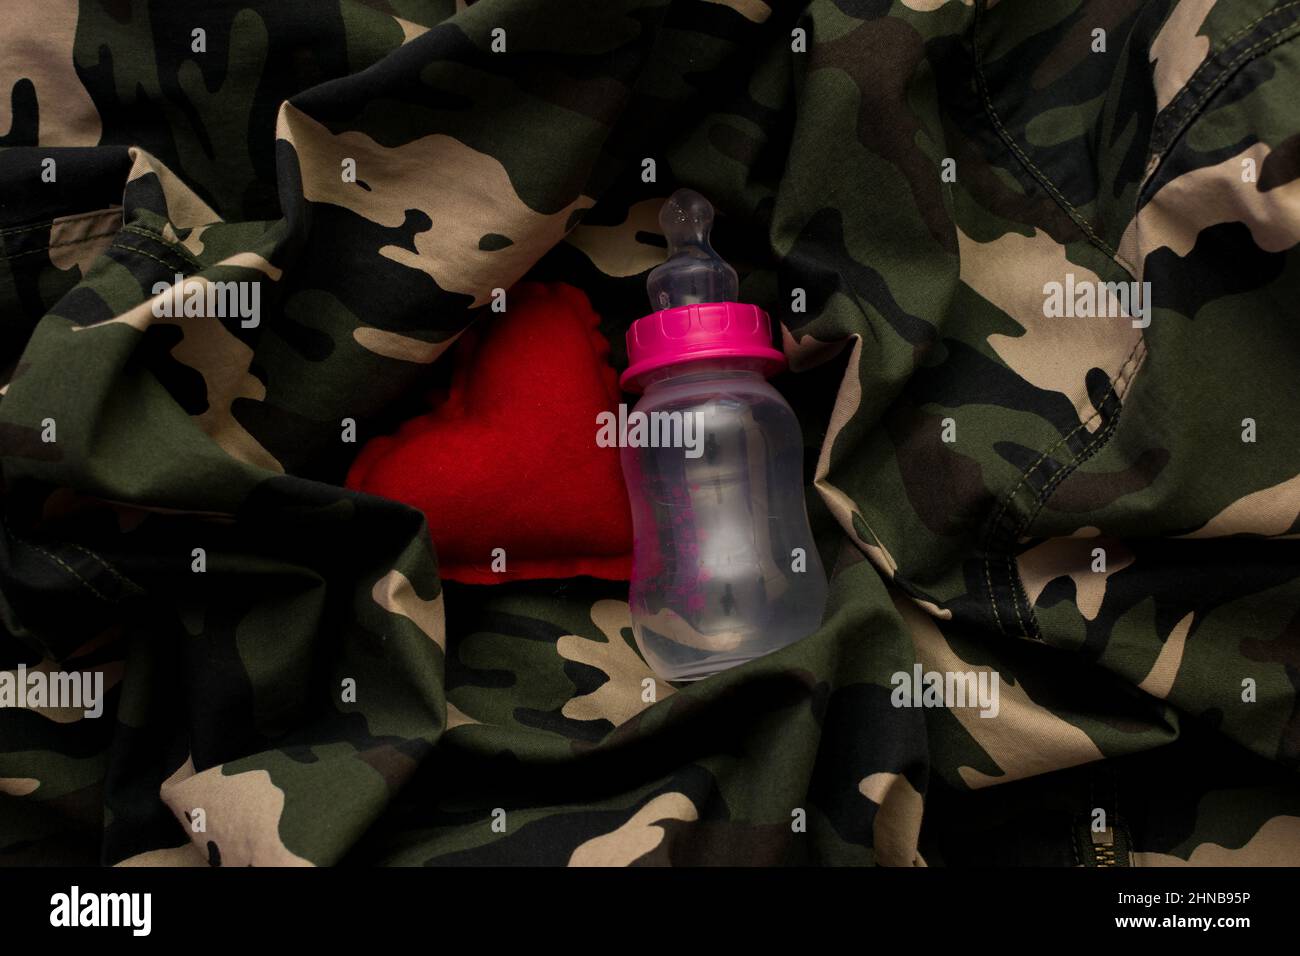 Red heart and baby bottle on military uniform, top view. Love and war concept Stock Photo